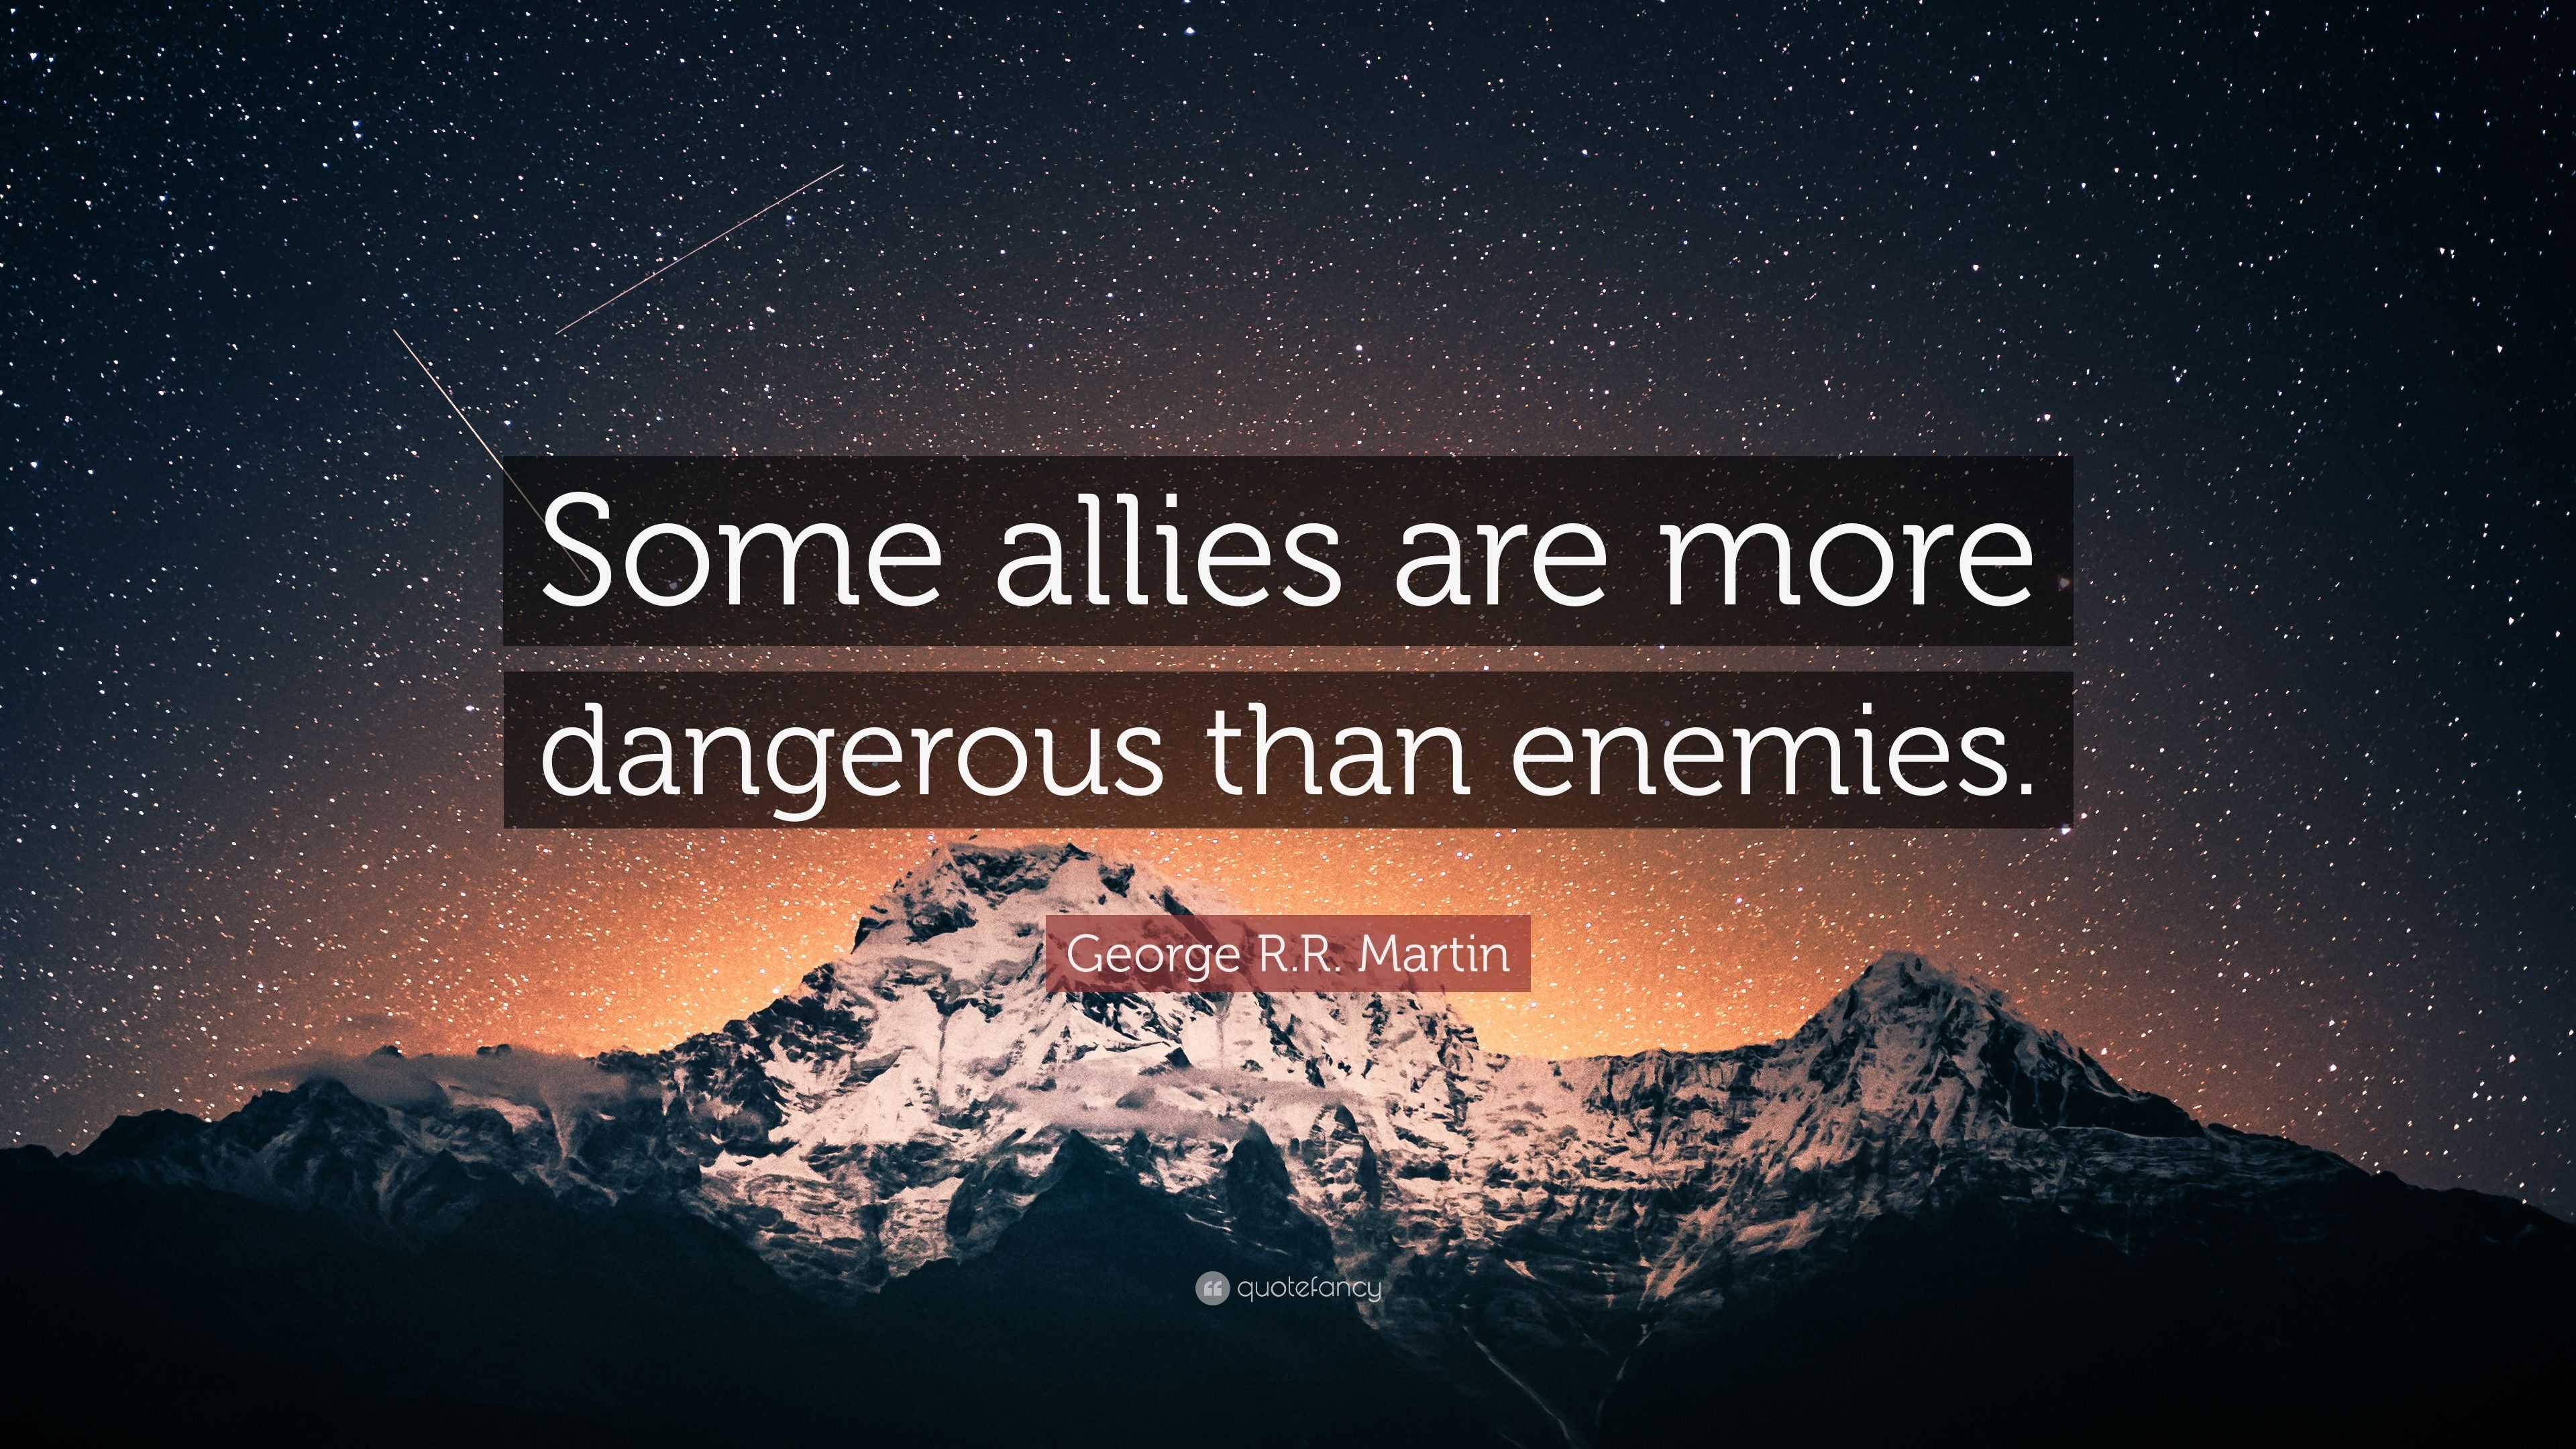 George R R Martin Quote Some Allies Are More Dangerous Than Enemies